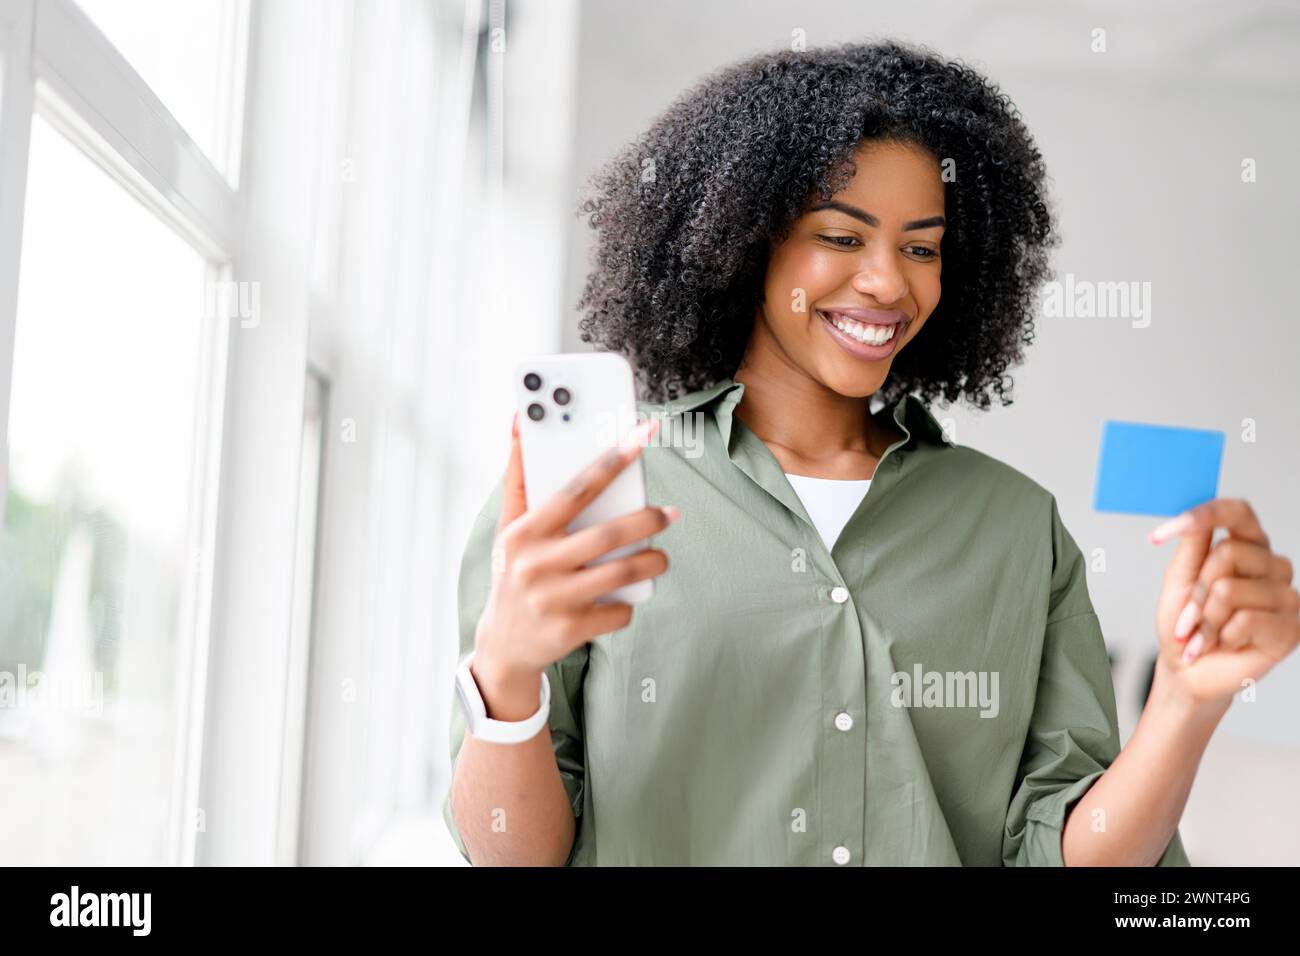 African-American woman beams with pleasure while holding a smartphone and a credit card, possibly making an online purchase or reservation, in a bright, modern interior. Stock Photo